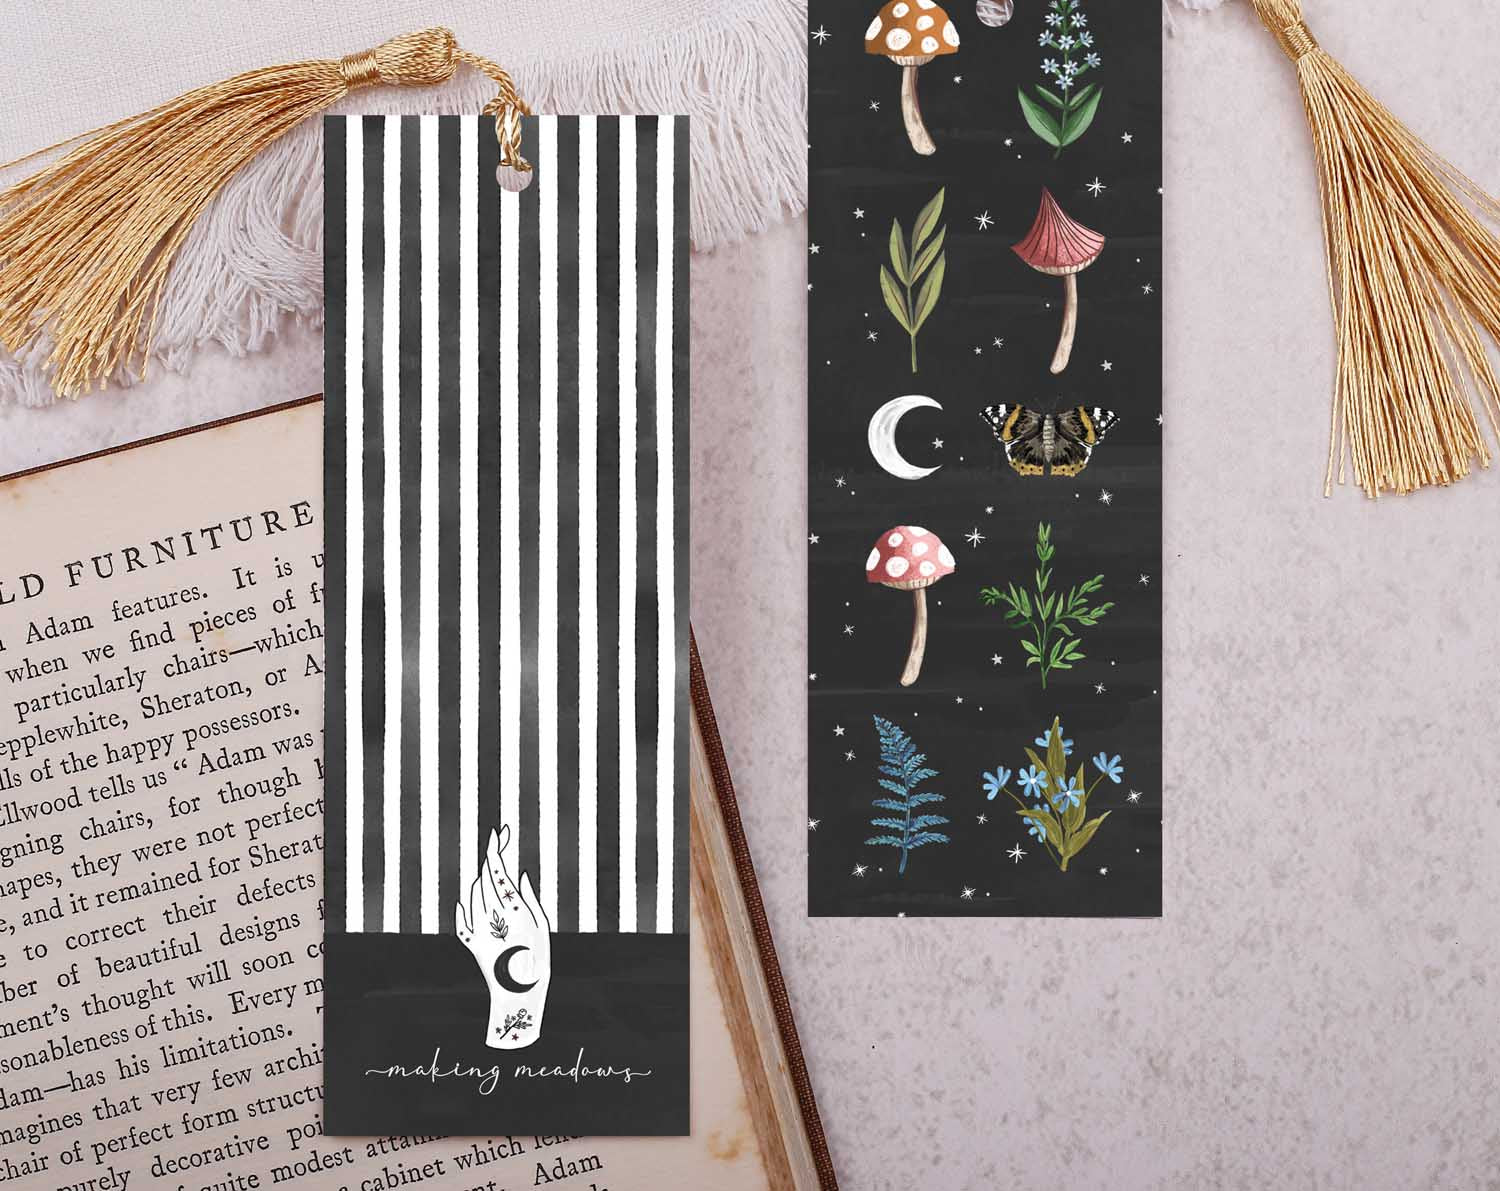 This beautiful paper bookmark is double sided. The main side features a celestial witchy pattern featuring the moon, ferns and mushrooms whilst the flip side shows a complimentary Beetlejuice monochrome pattern